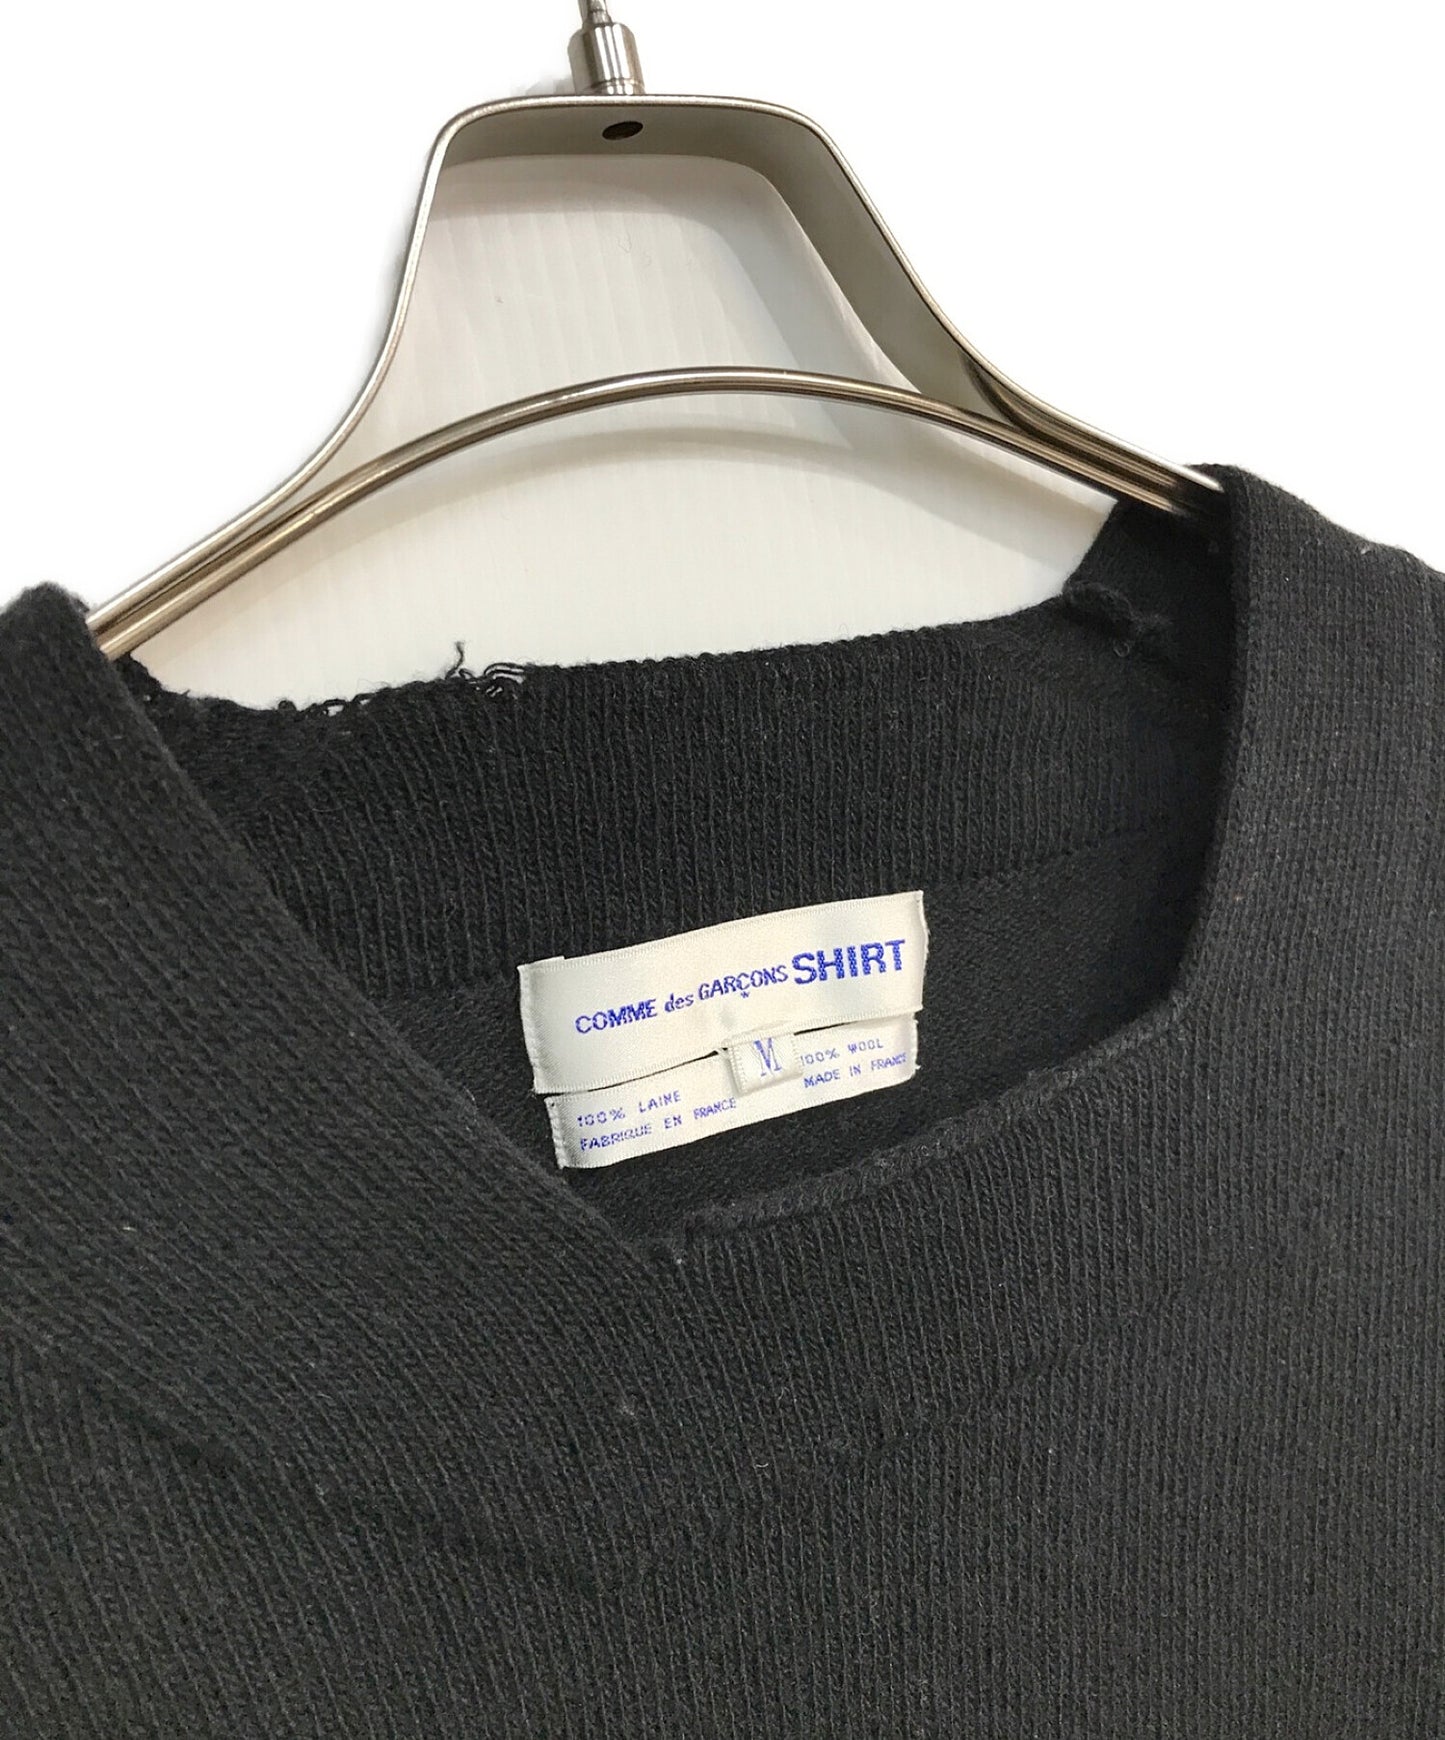 COMME des GARCONS SHIRT 90's Old Tag Made in France Square Collar Knit